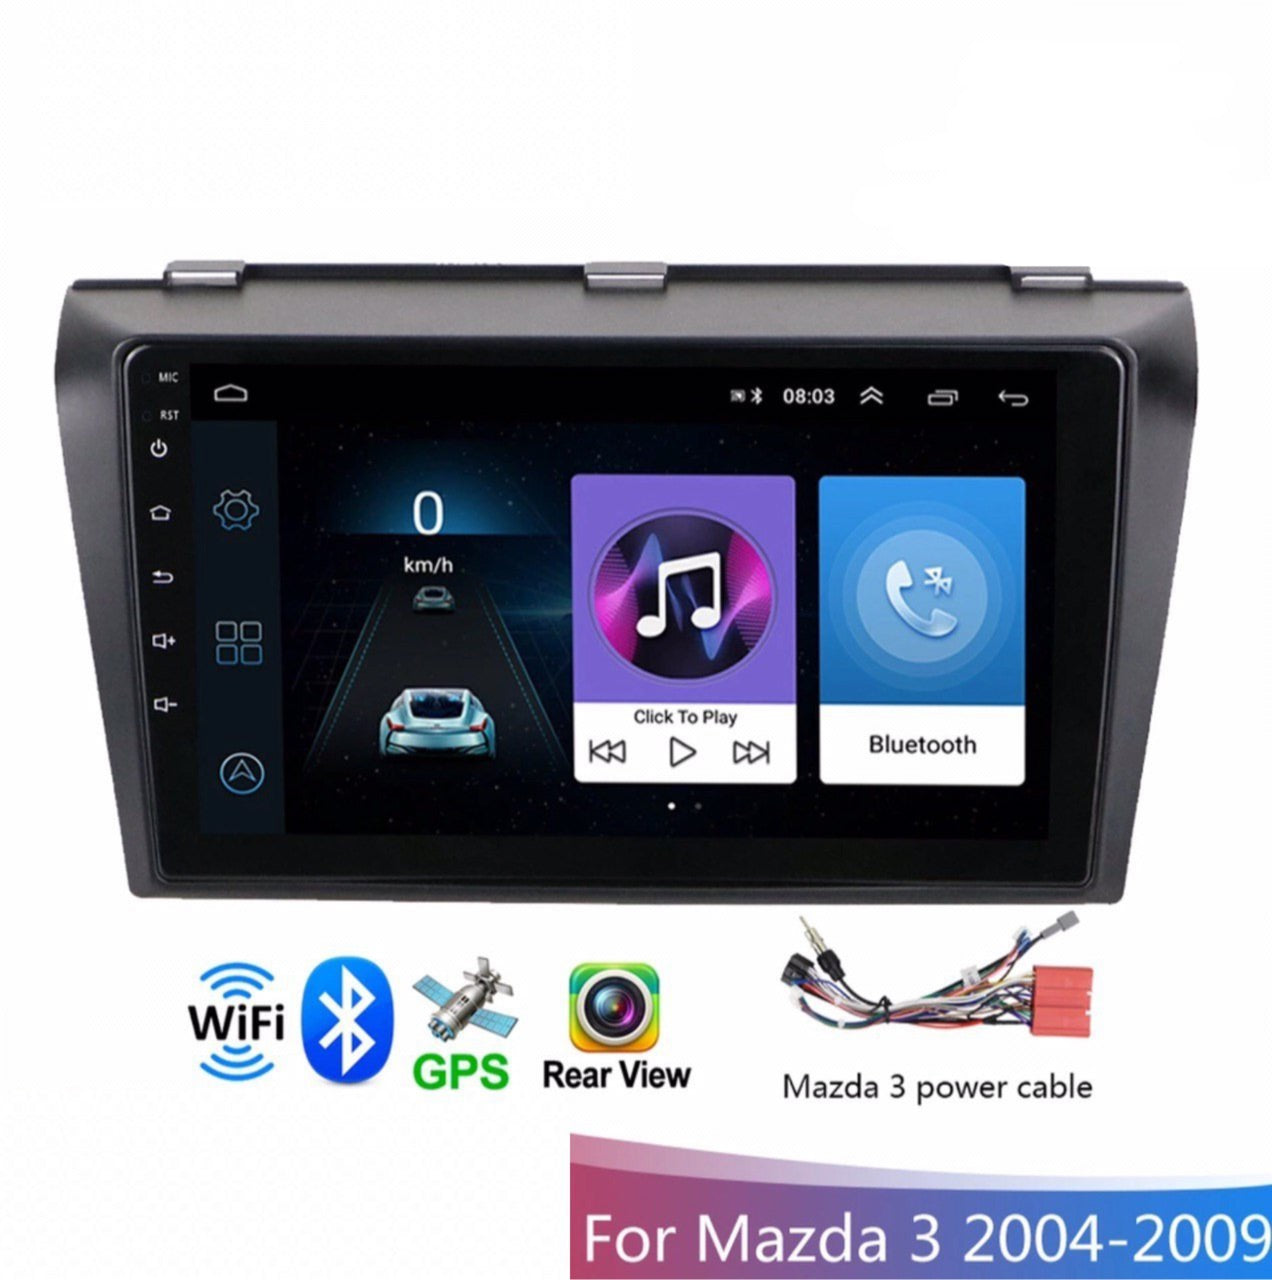 Mazda 3 Android Car GPS Stereo 1G 16G WIFI Free MAP Quad Core 2 din Multimedia for Mazda 3 2004-2009 Mazda 3 Head Unit Replacement